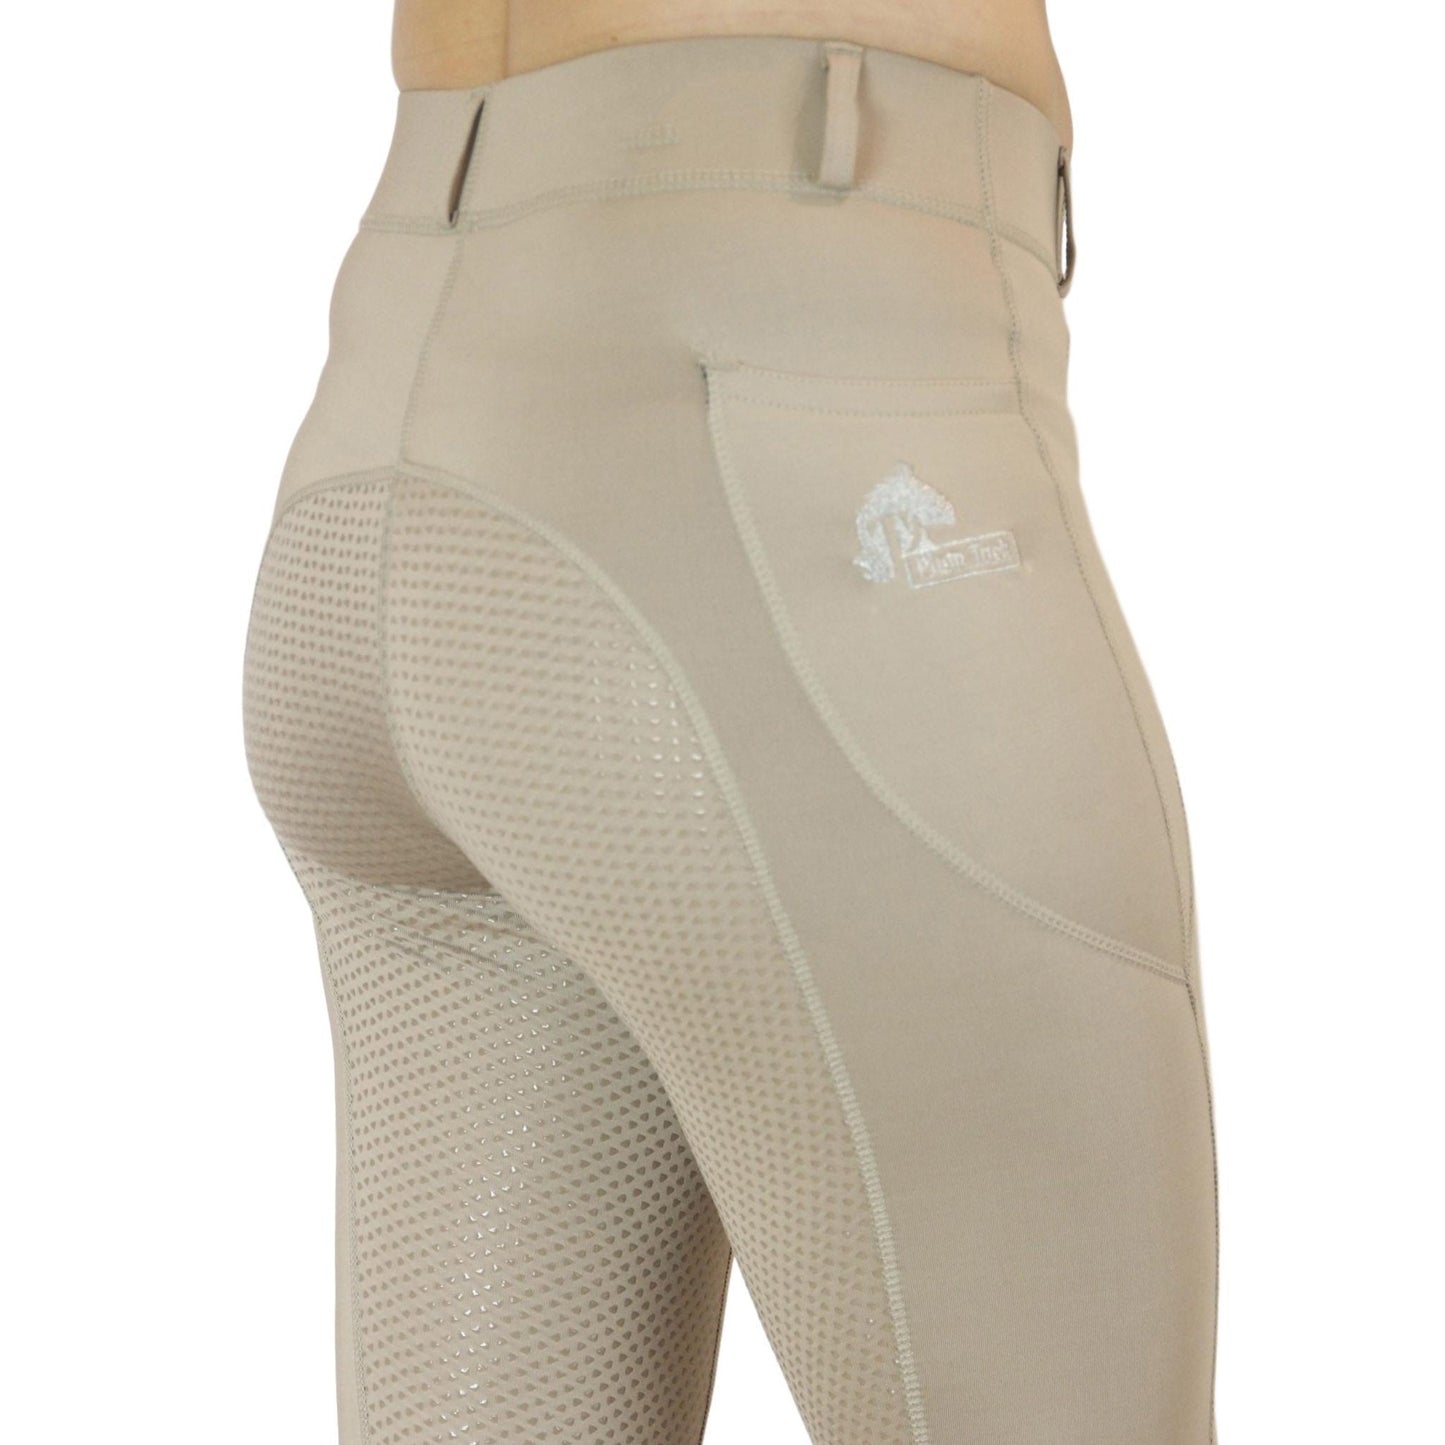 Person wearing beige horse riding tights with mesh detailing.